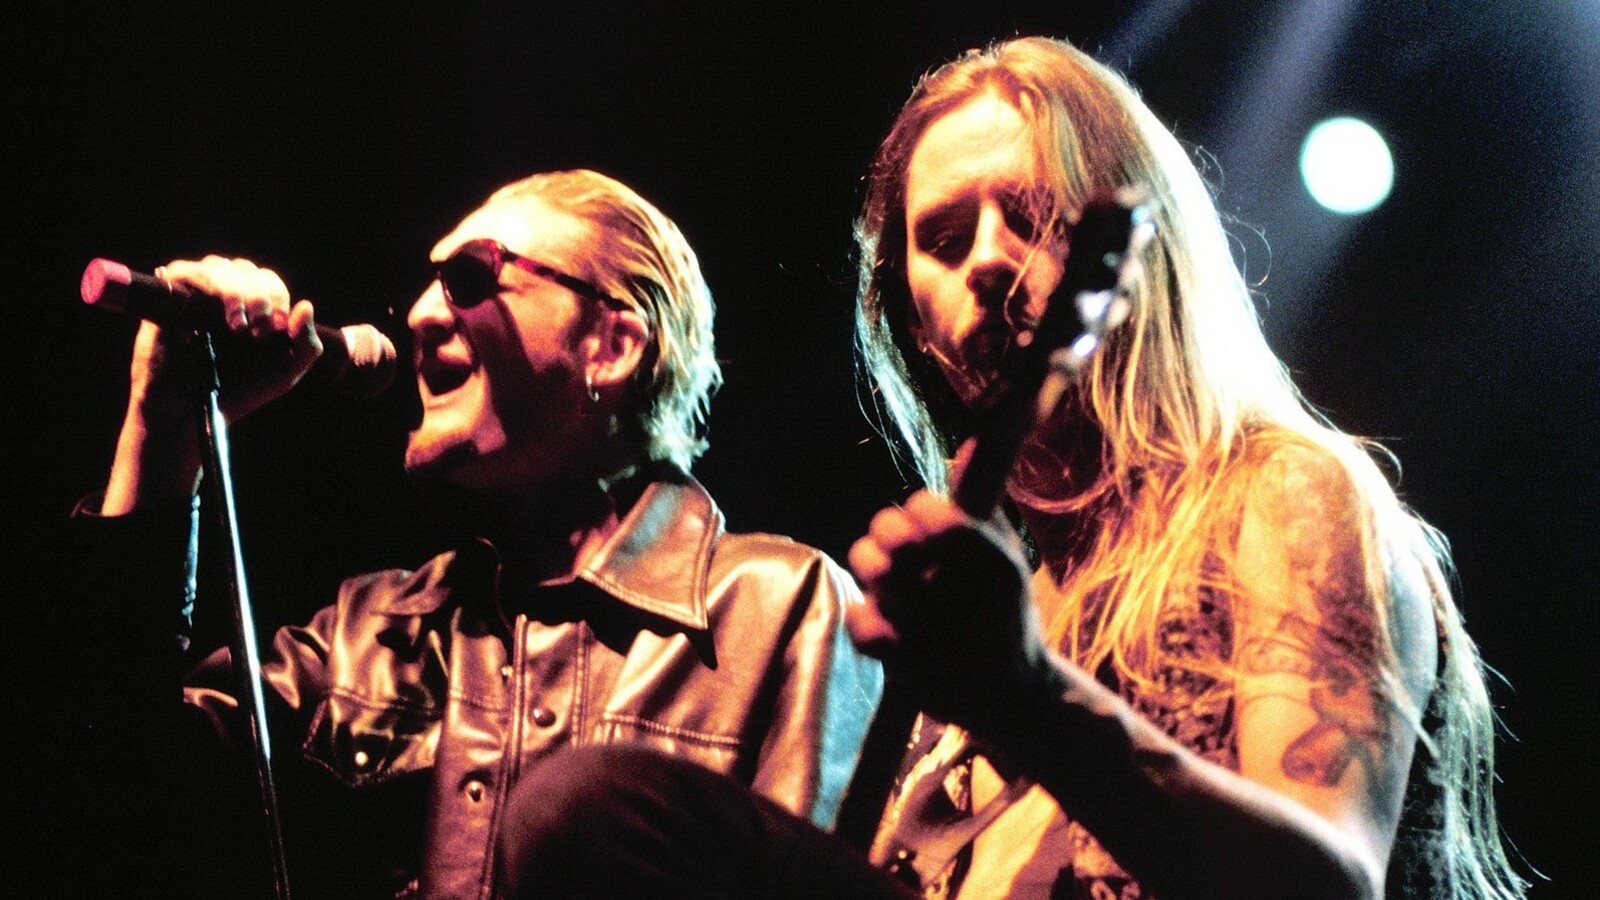 ALICE IN CHAINS albums ranked, from worst to best